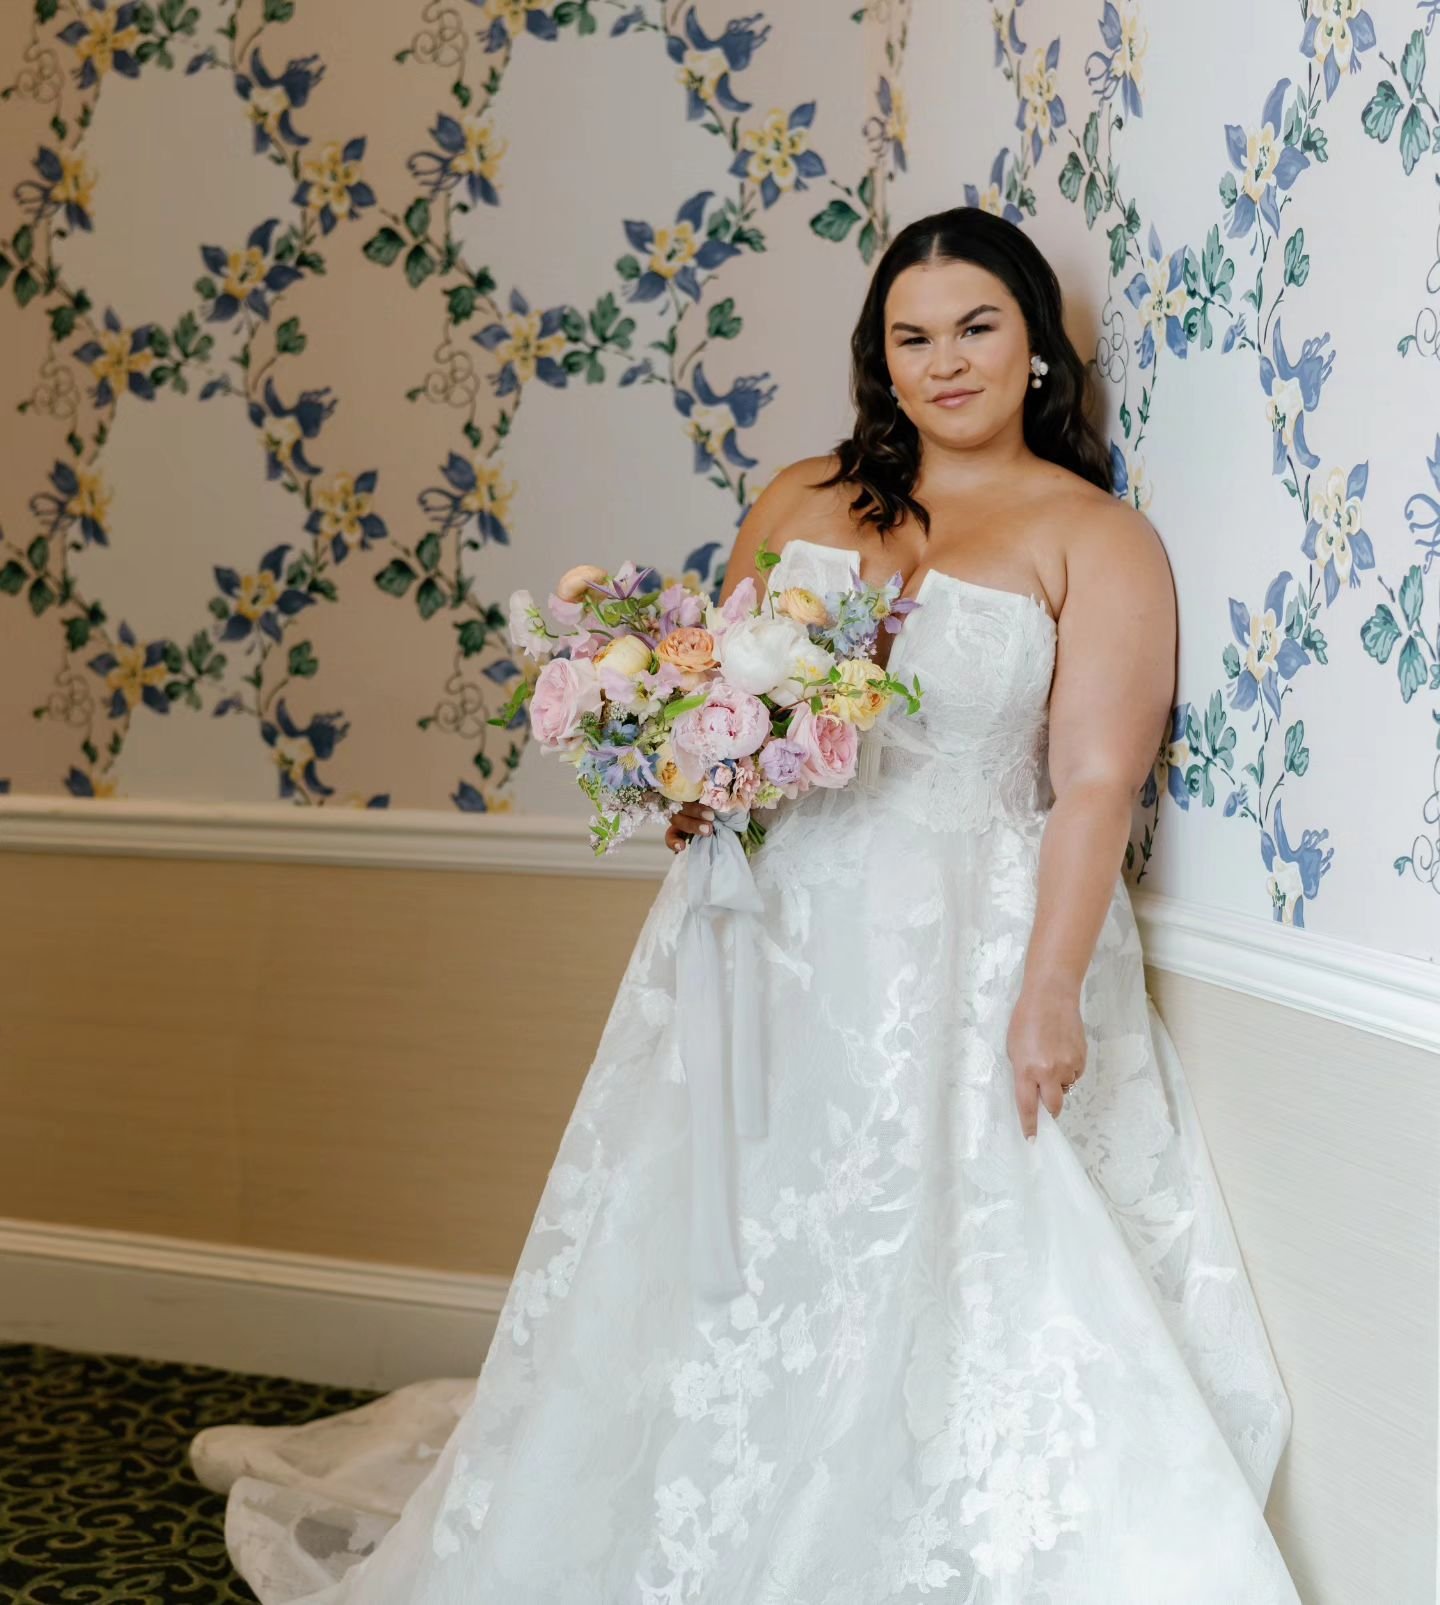 Thinking about this beautiful bride this morning, as her wedding was about this time last year. She chose her wedding theme with the show Bridgerton in mind and her floral preference included a design style that was not 'stemmy'.

Side note, as I am 